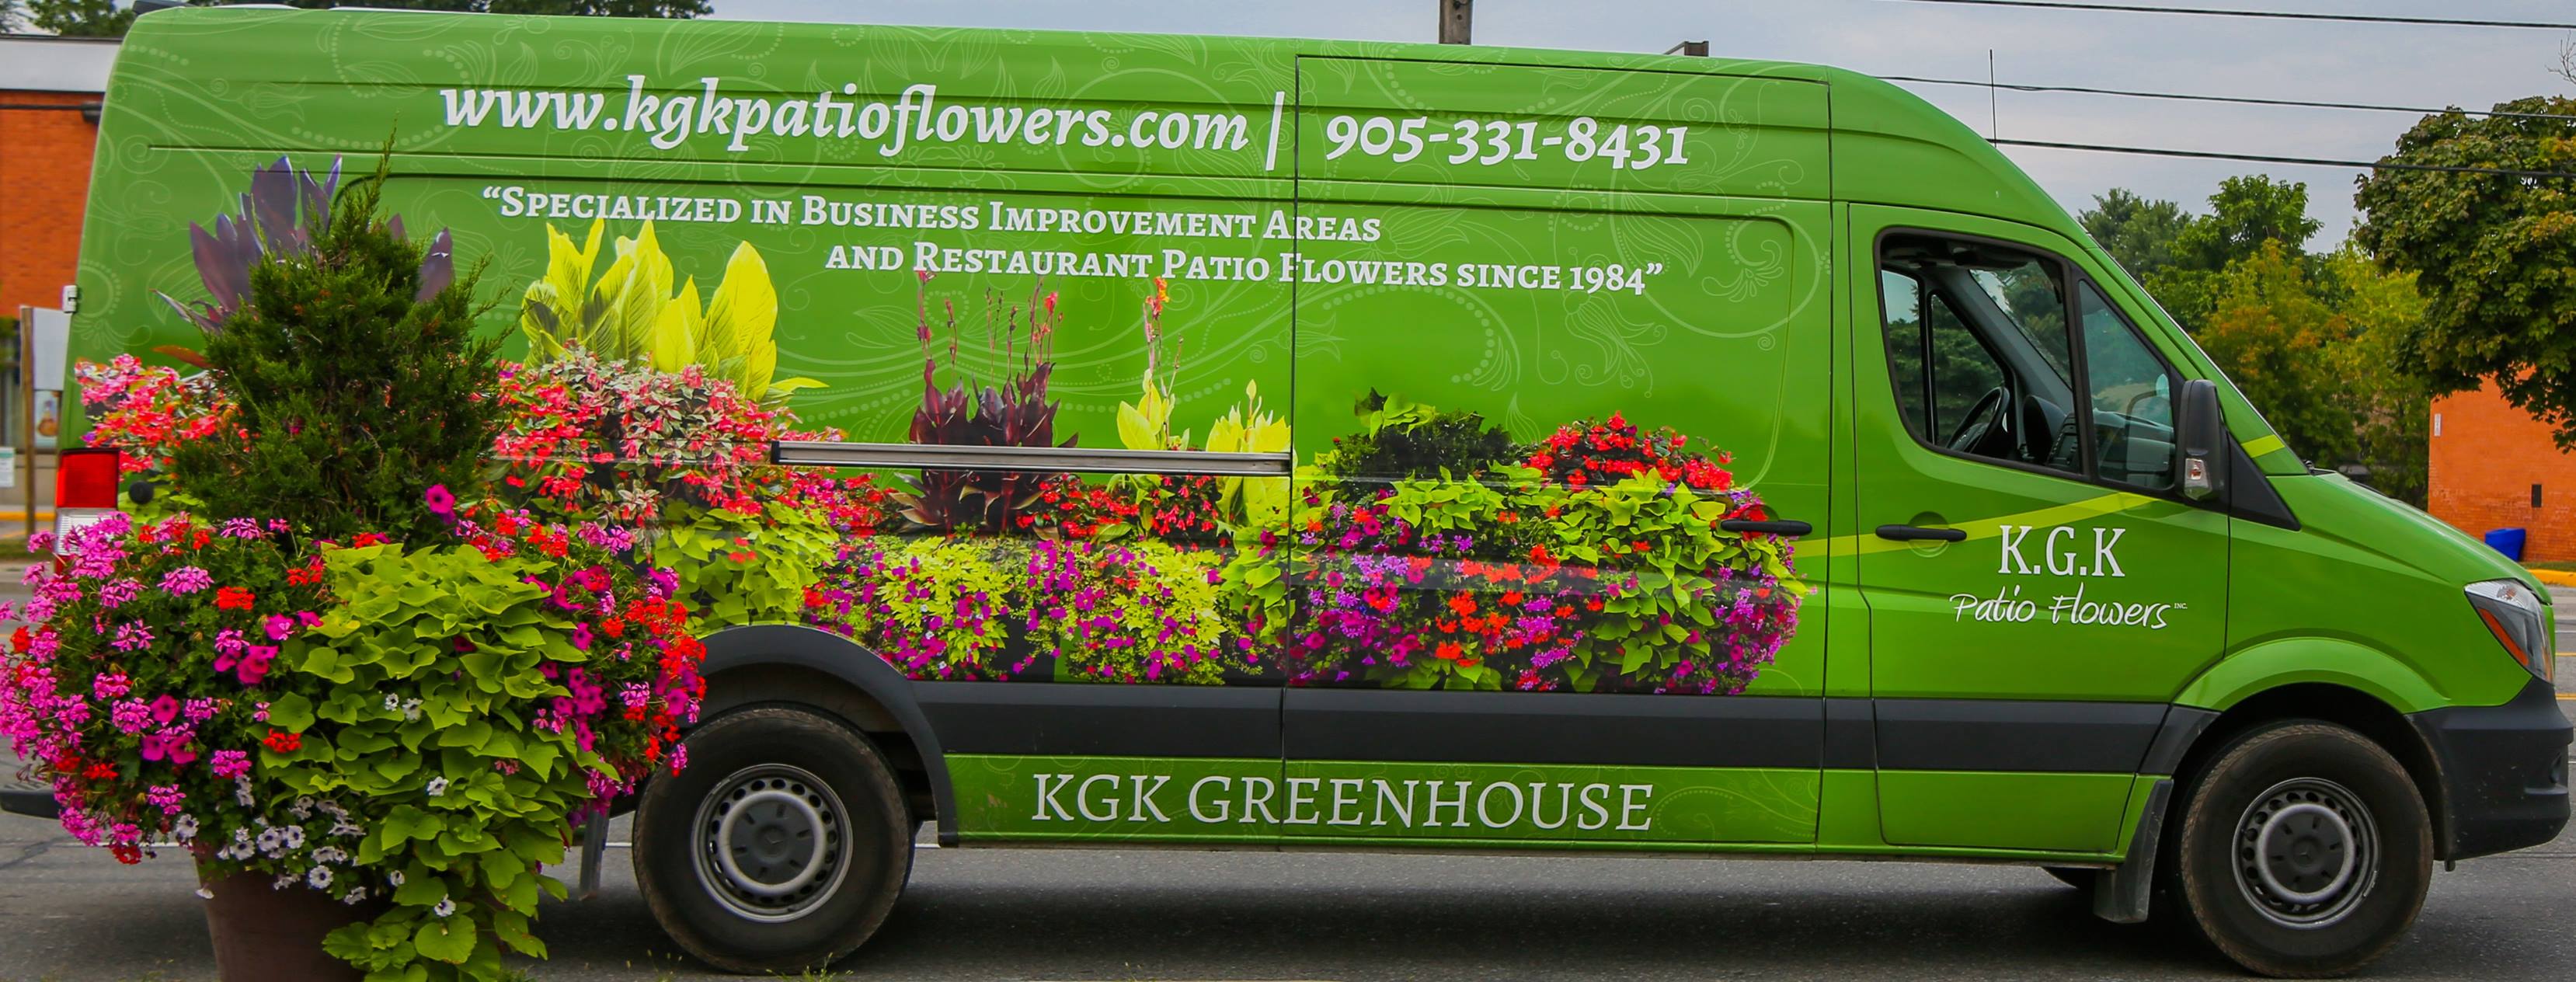 About KGK Patio Flowers